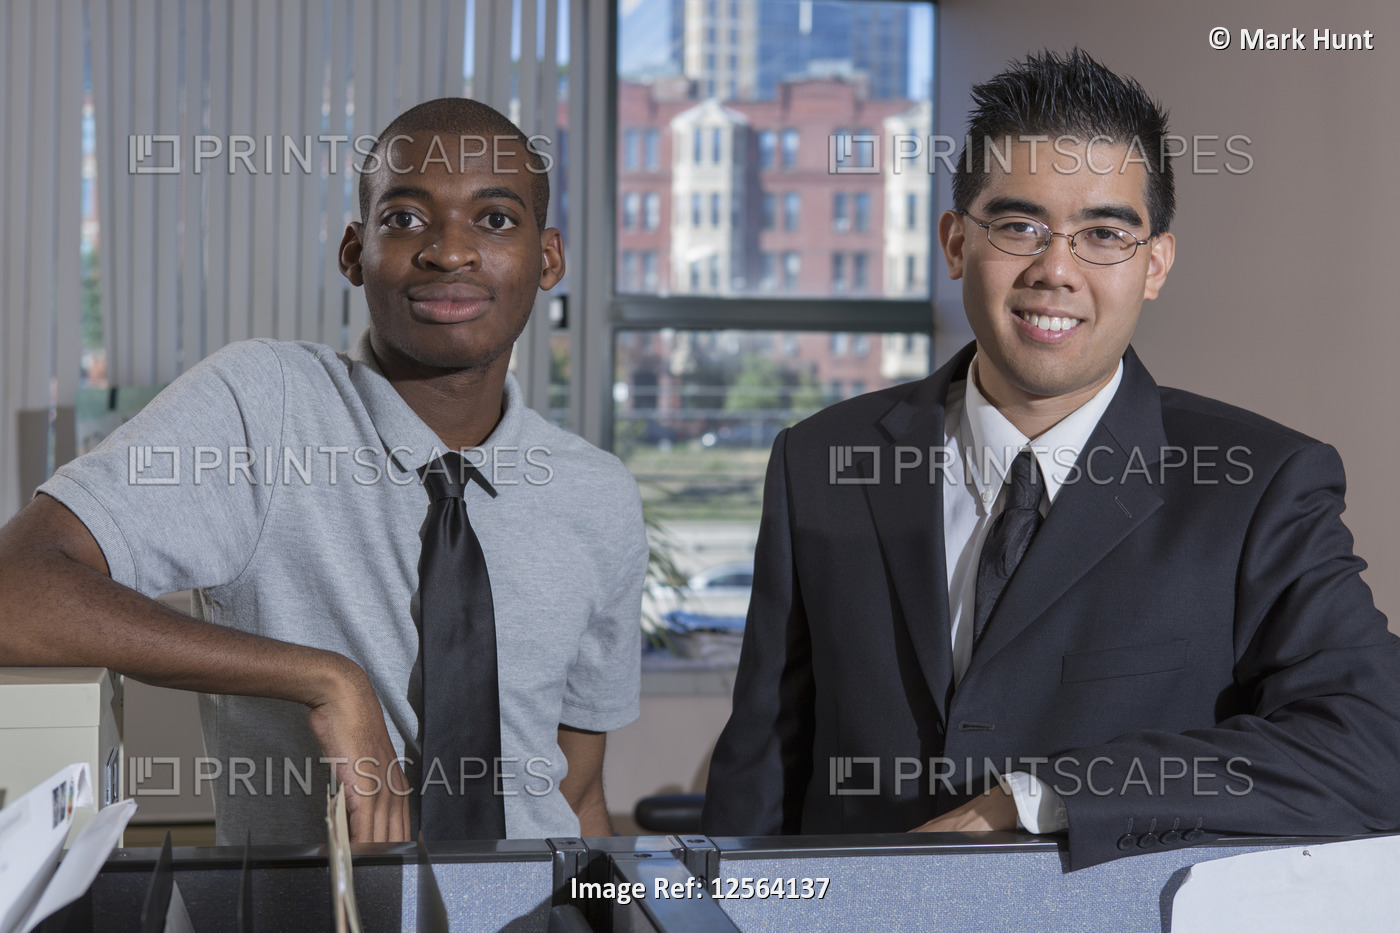 Portrait of two men with Autism smiling in an office